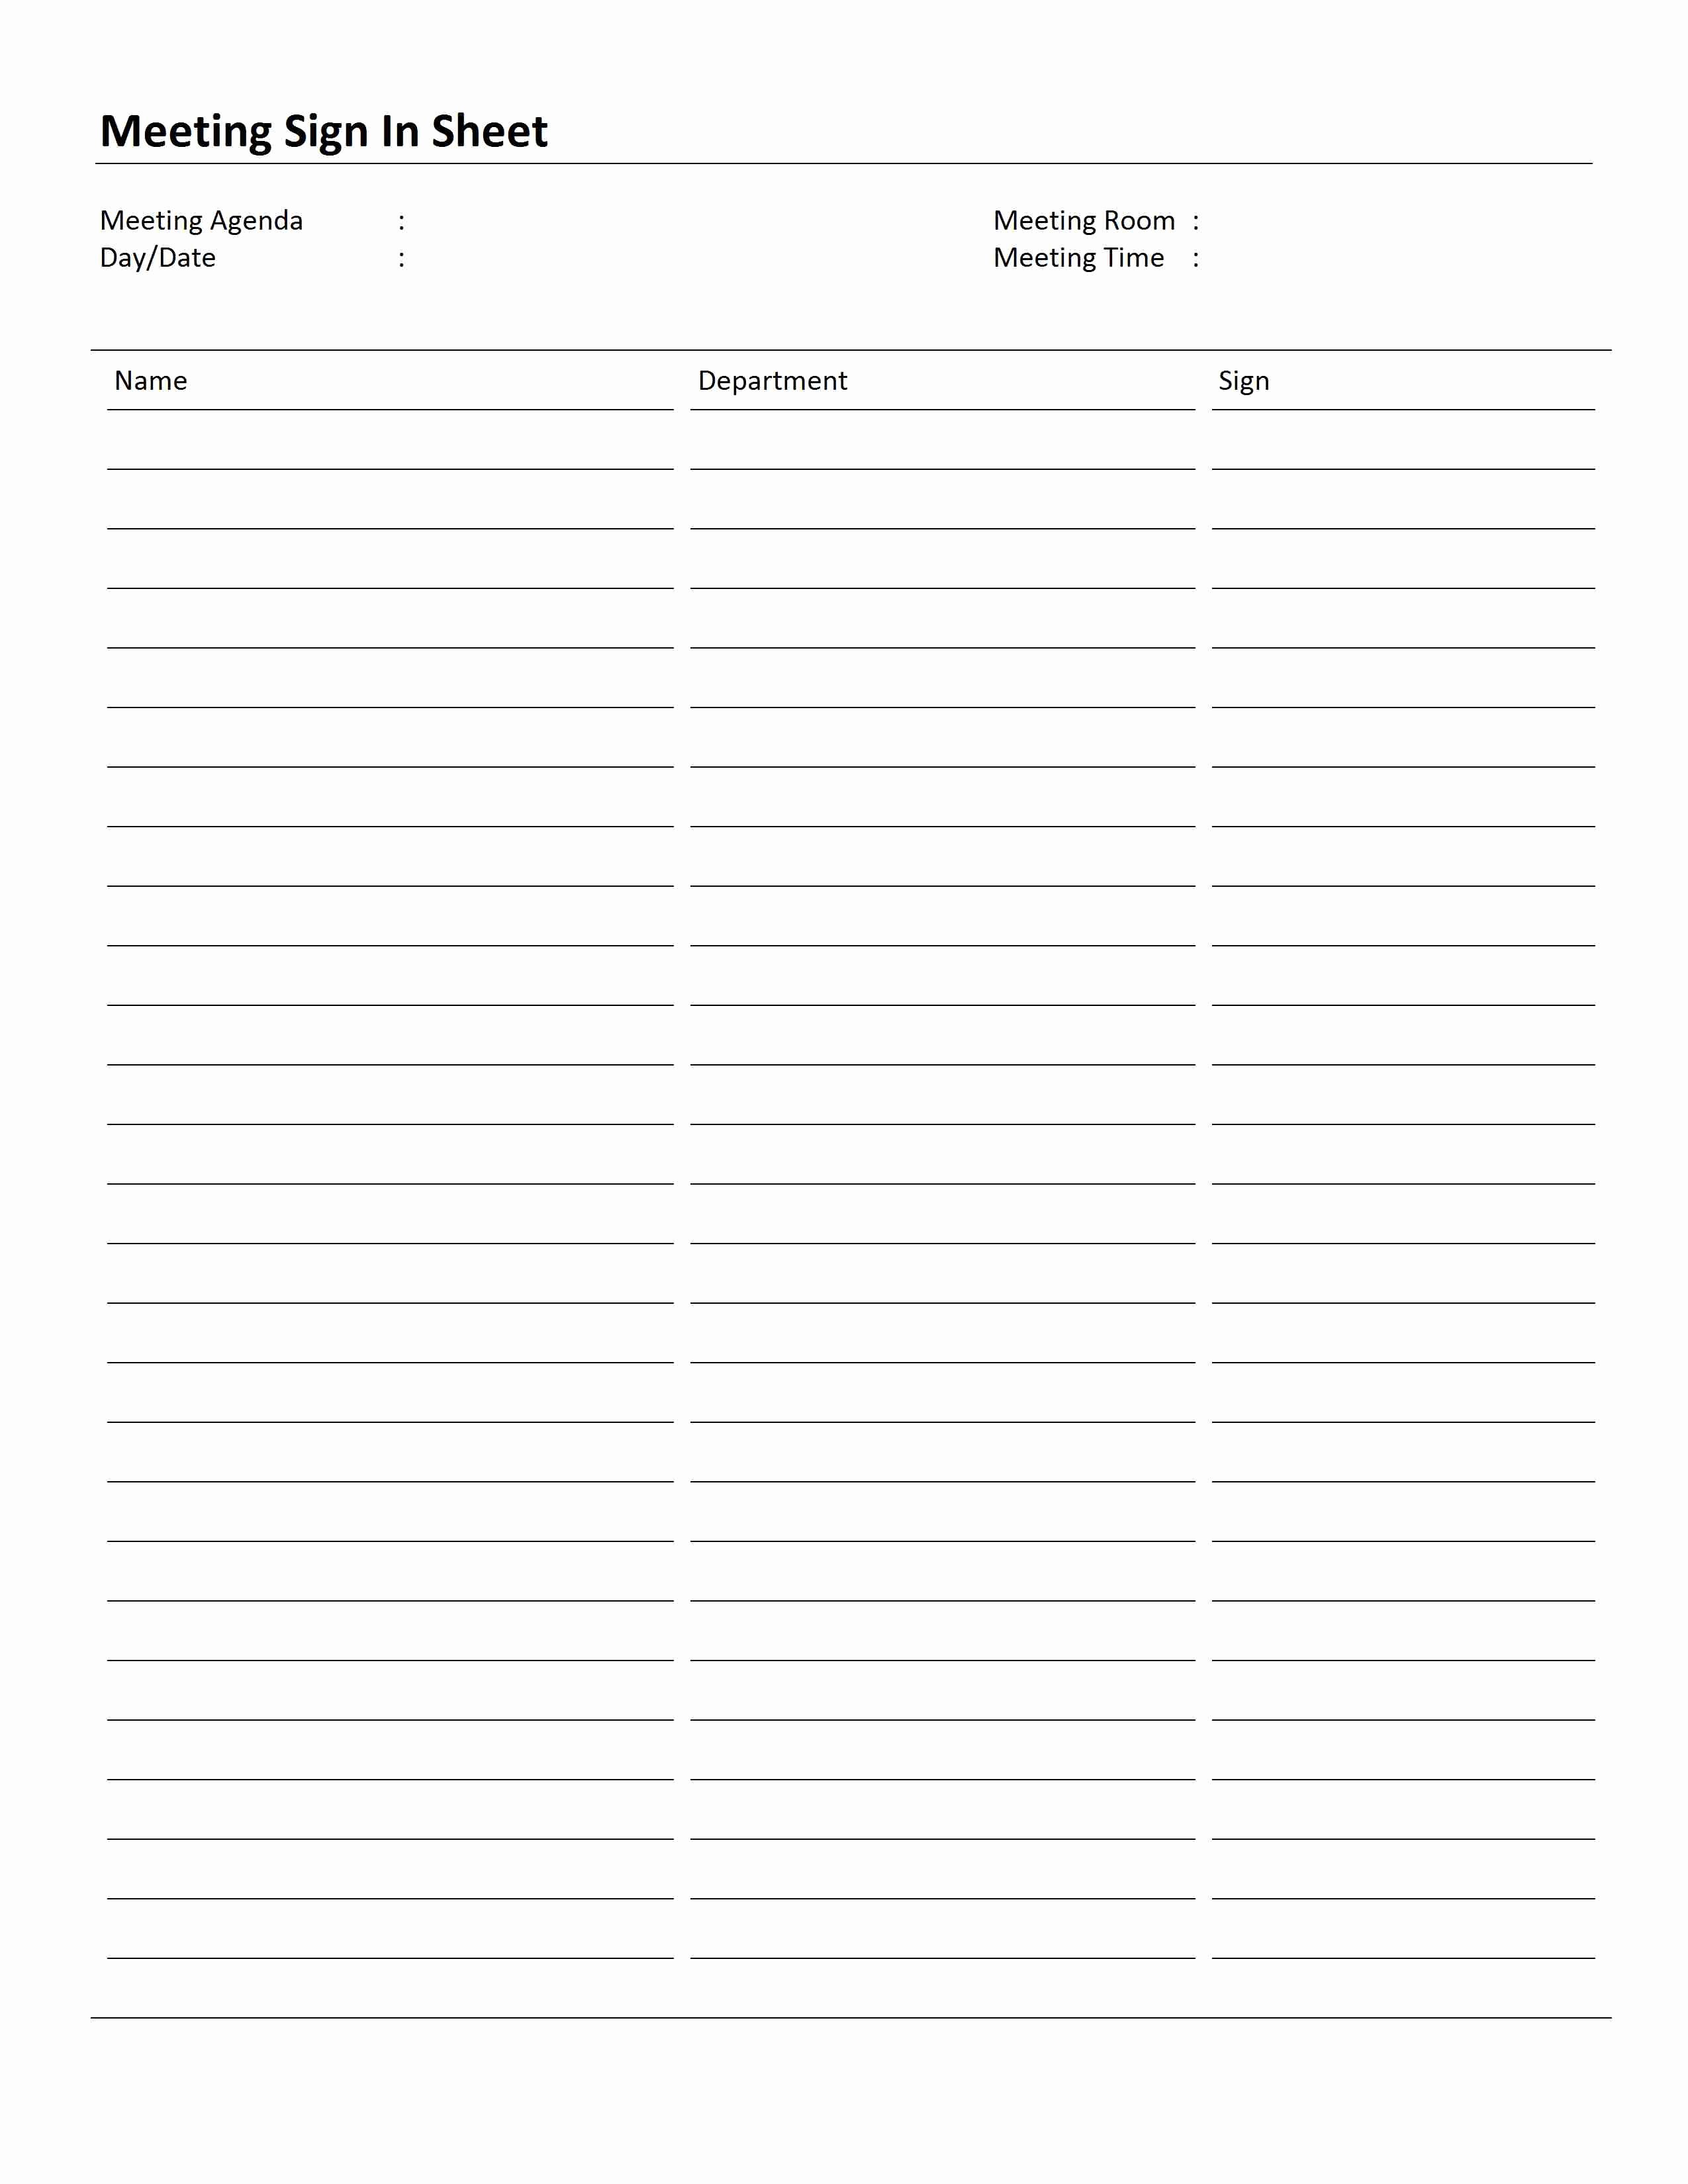 Meeting Sign In Sheet Excel Beautiful Sign In Roster Template Portablegasgrillweber